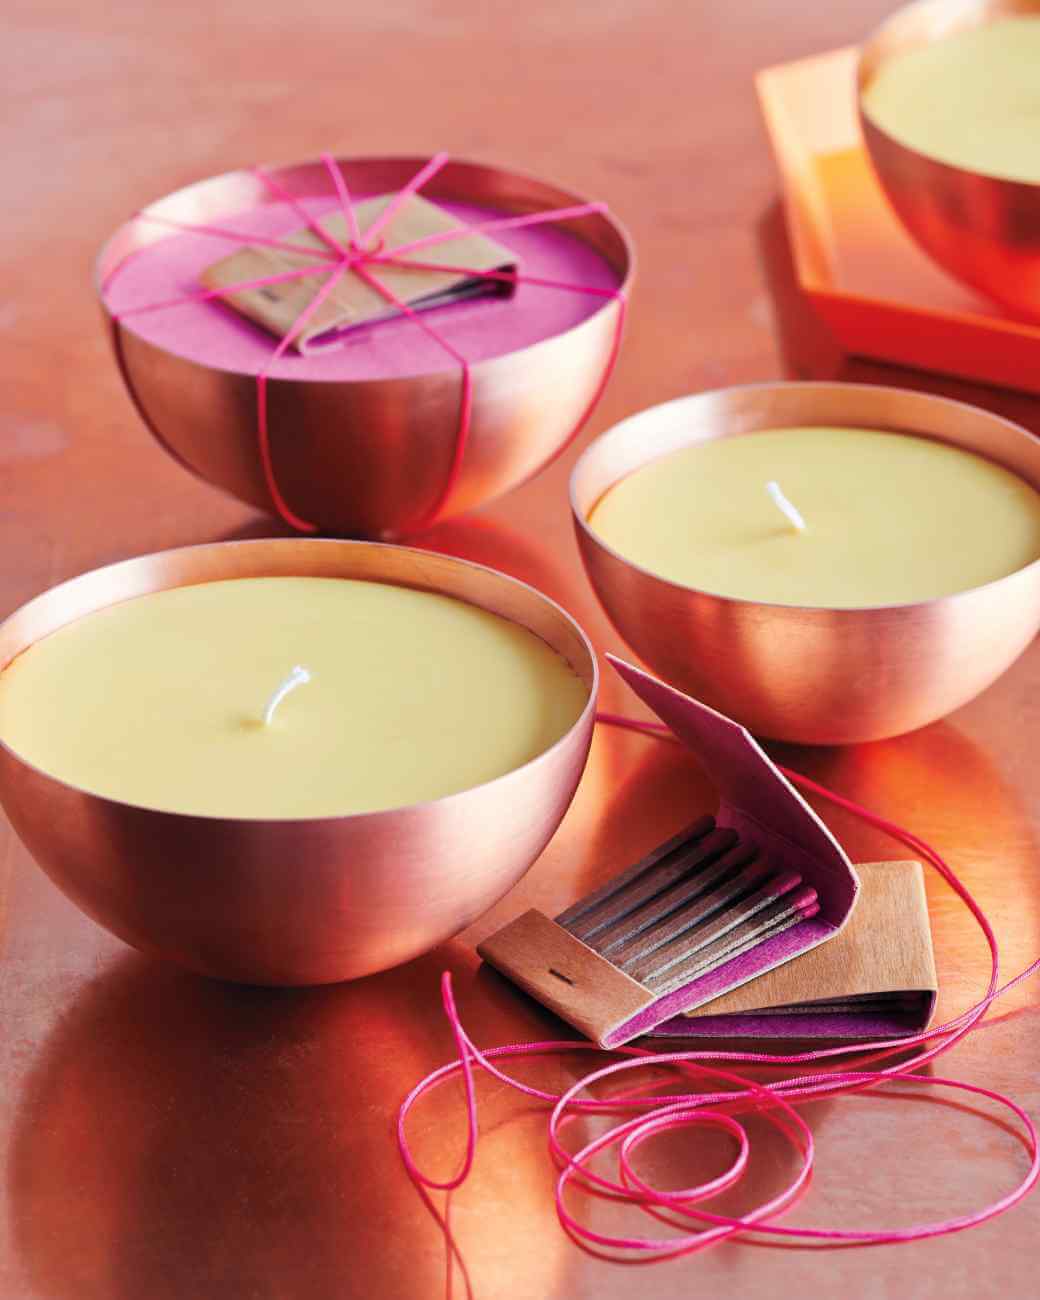 Candles Scents And Sensibility: Aromatherapy In Home Design